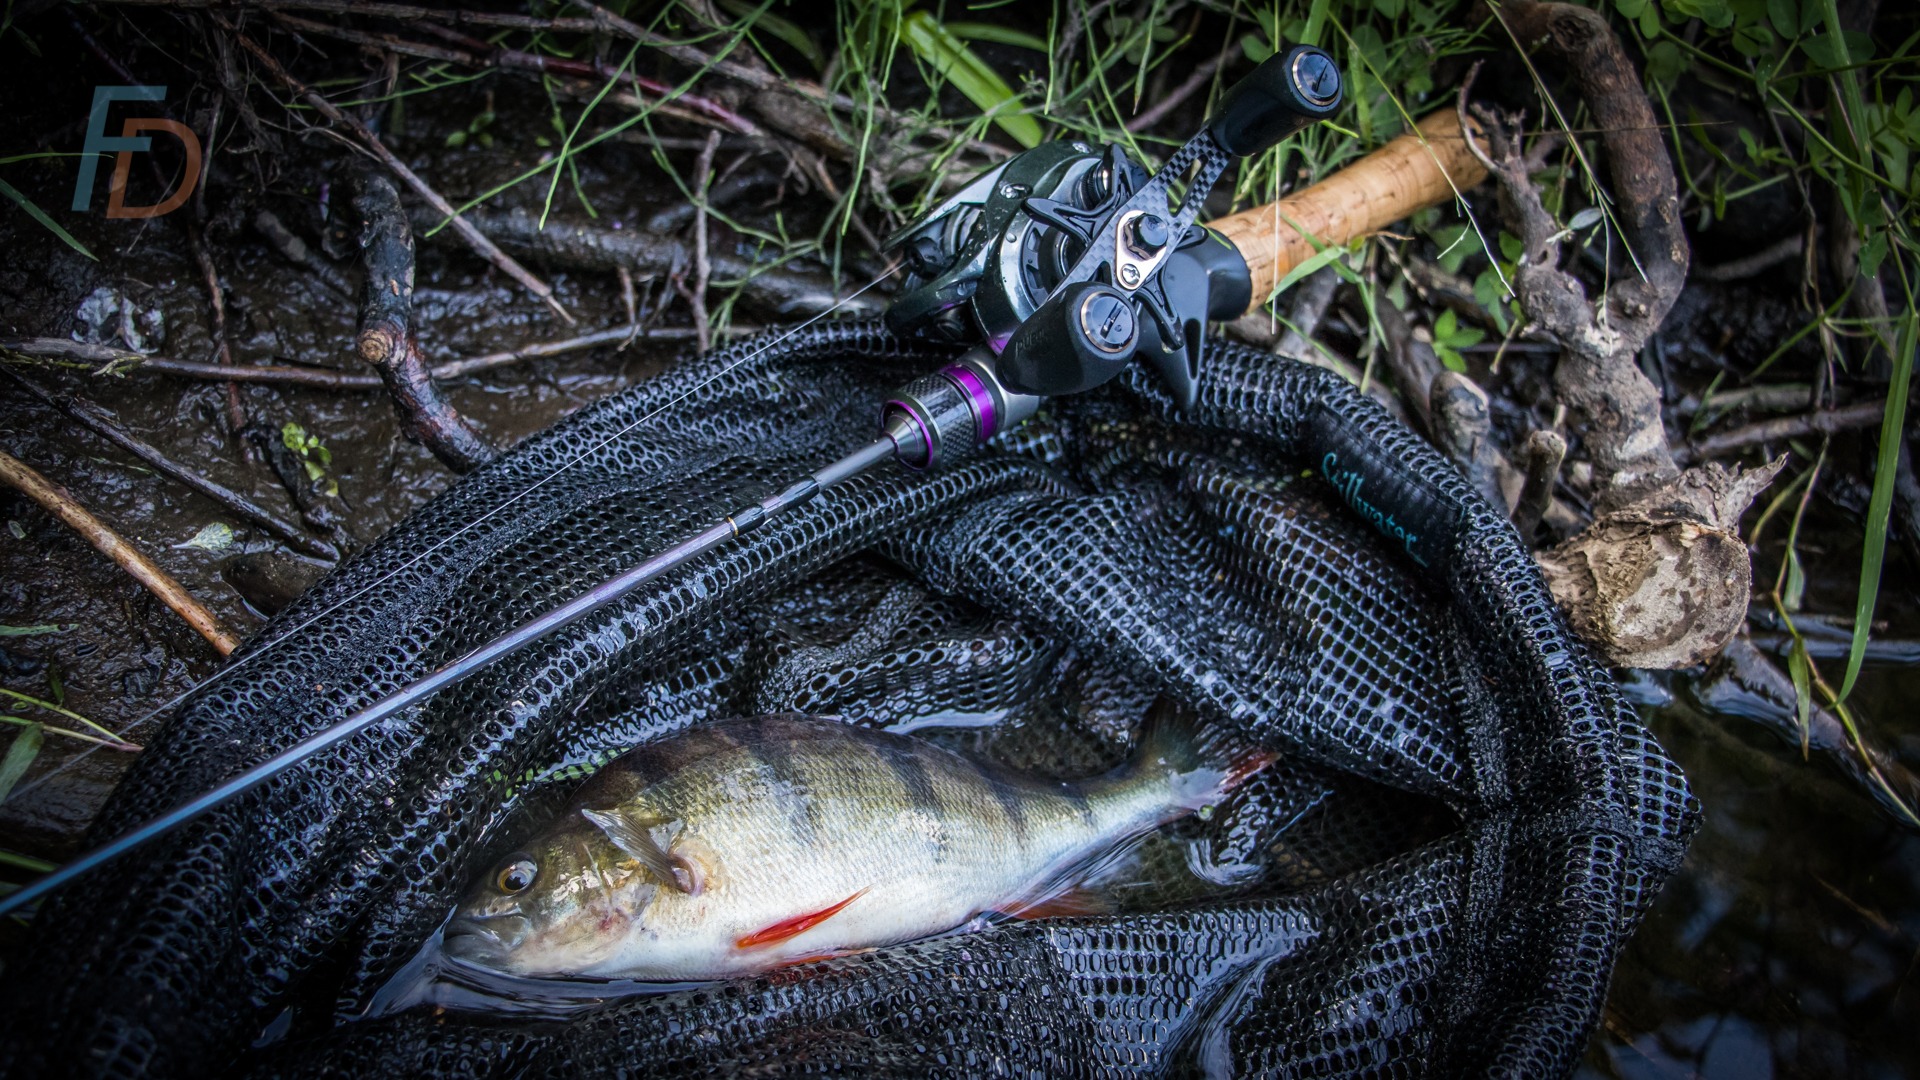 bait finesse casting skills rewarded with a perch